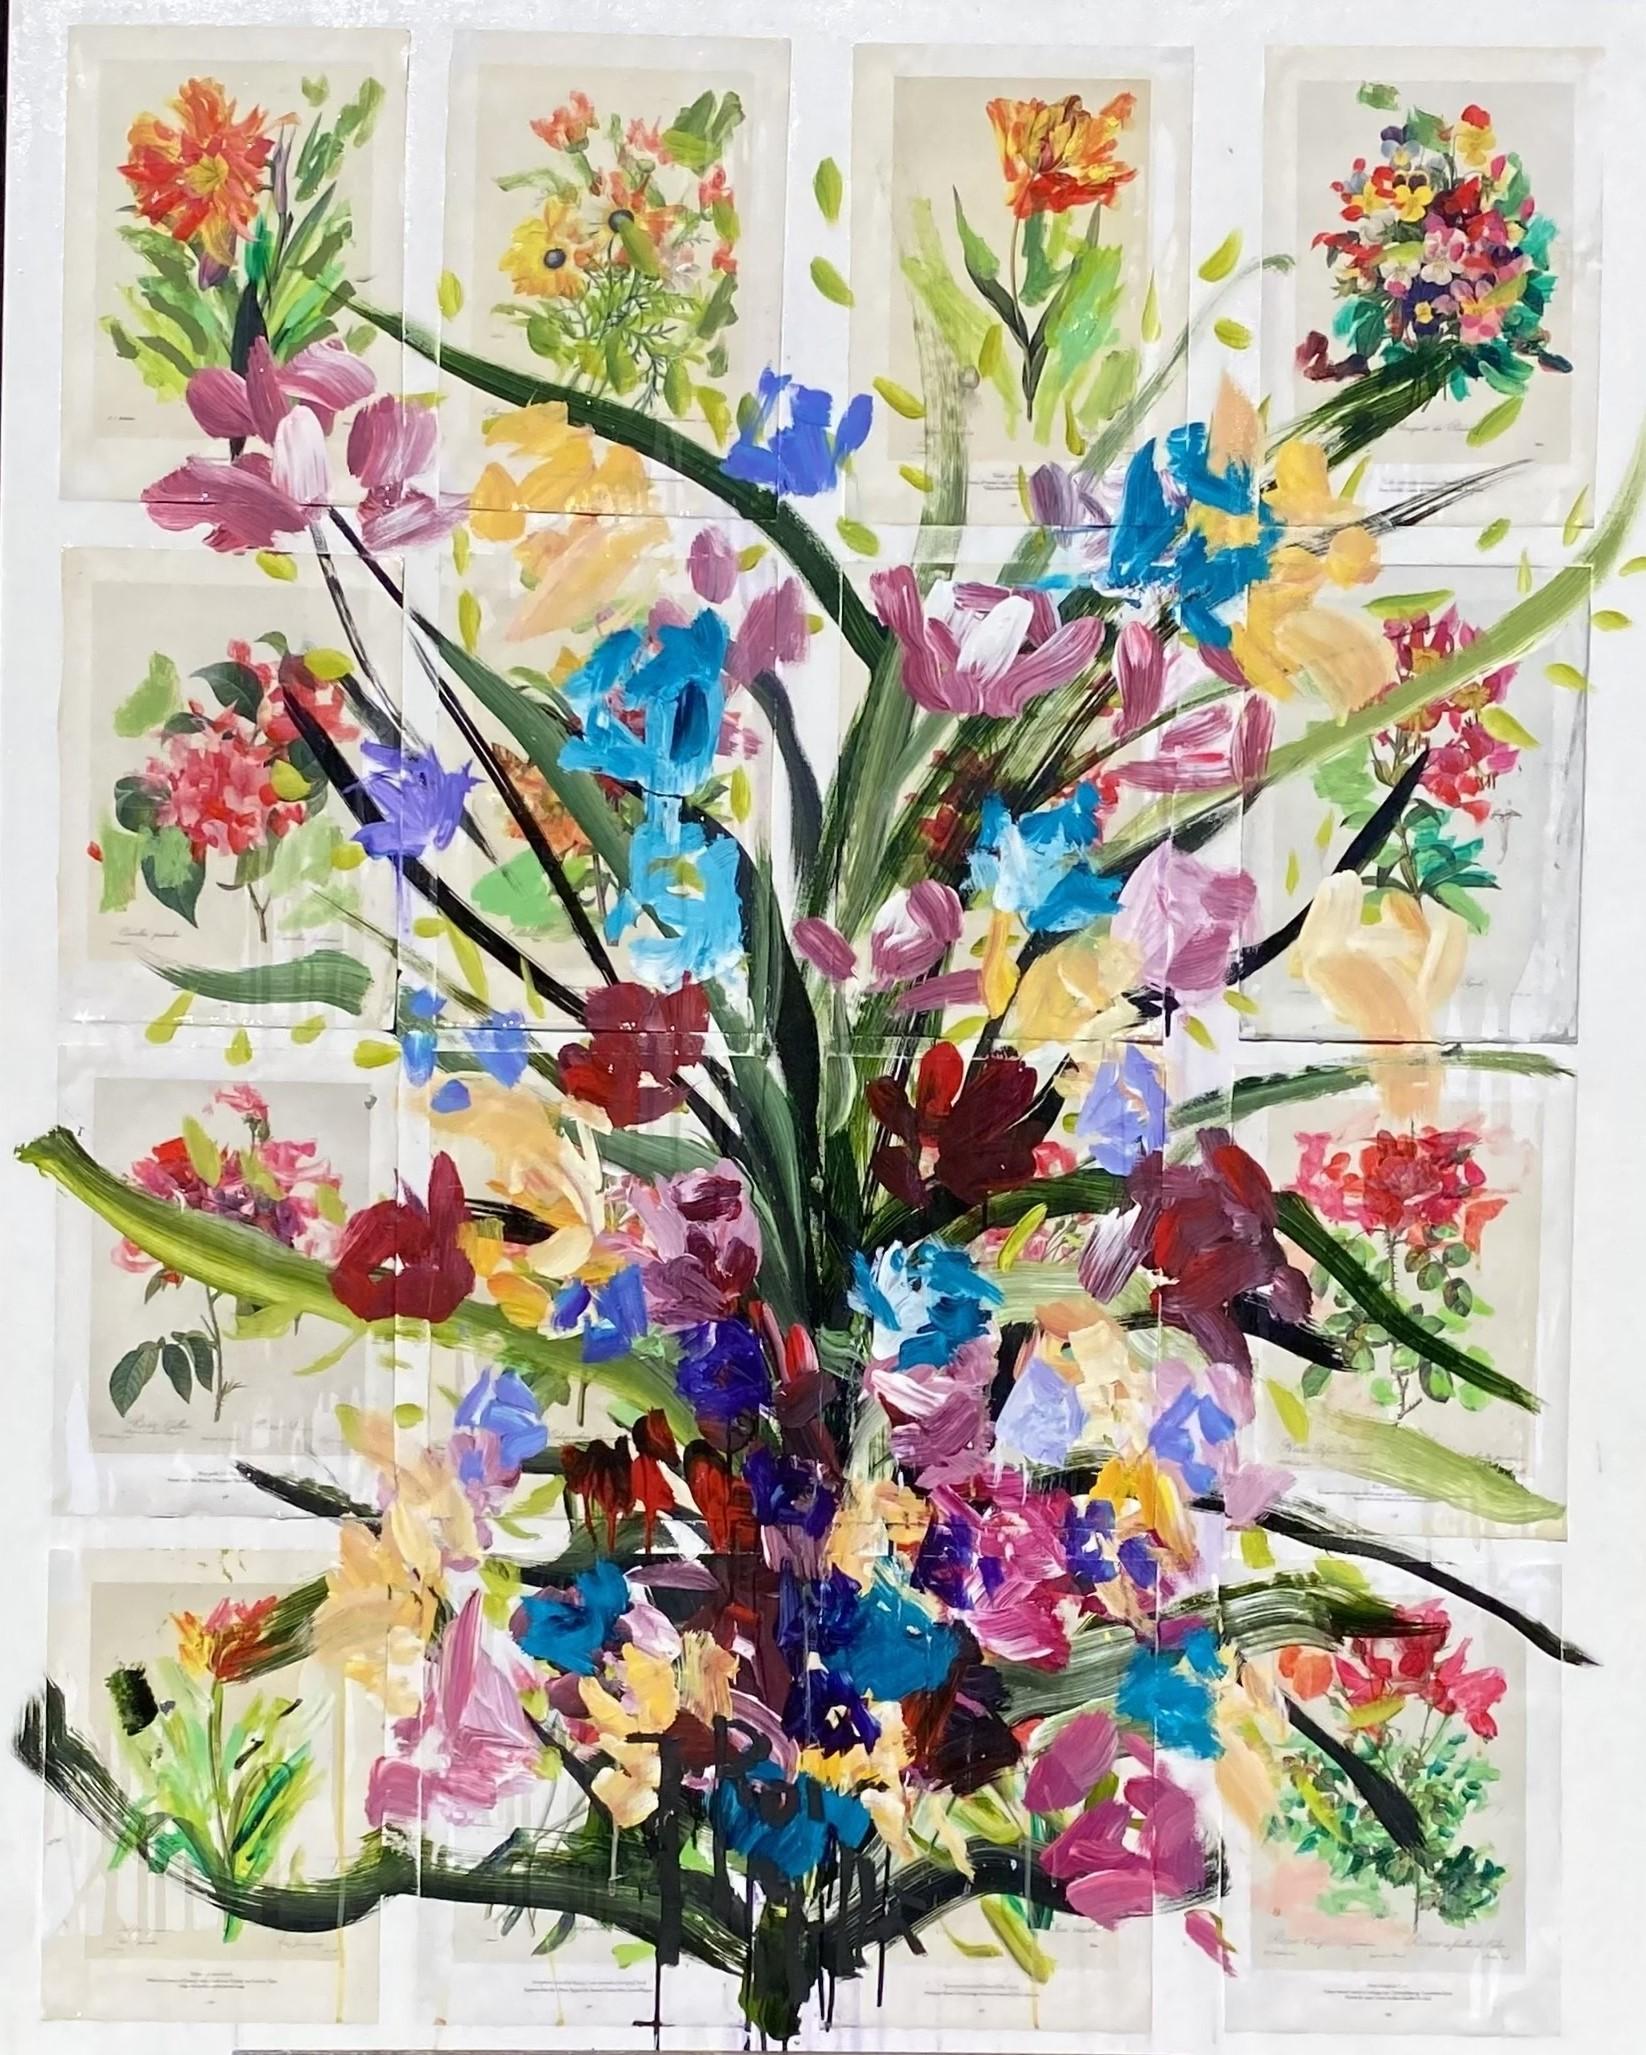 Book of Flowers 3 (small)  - Mixed Media Art by Jordi Mollà